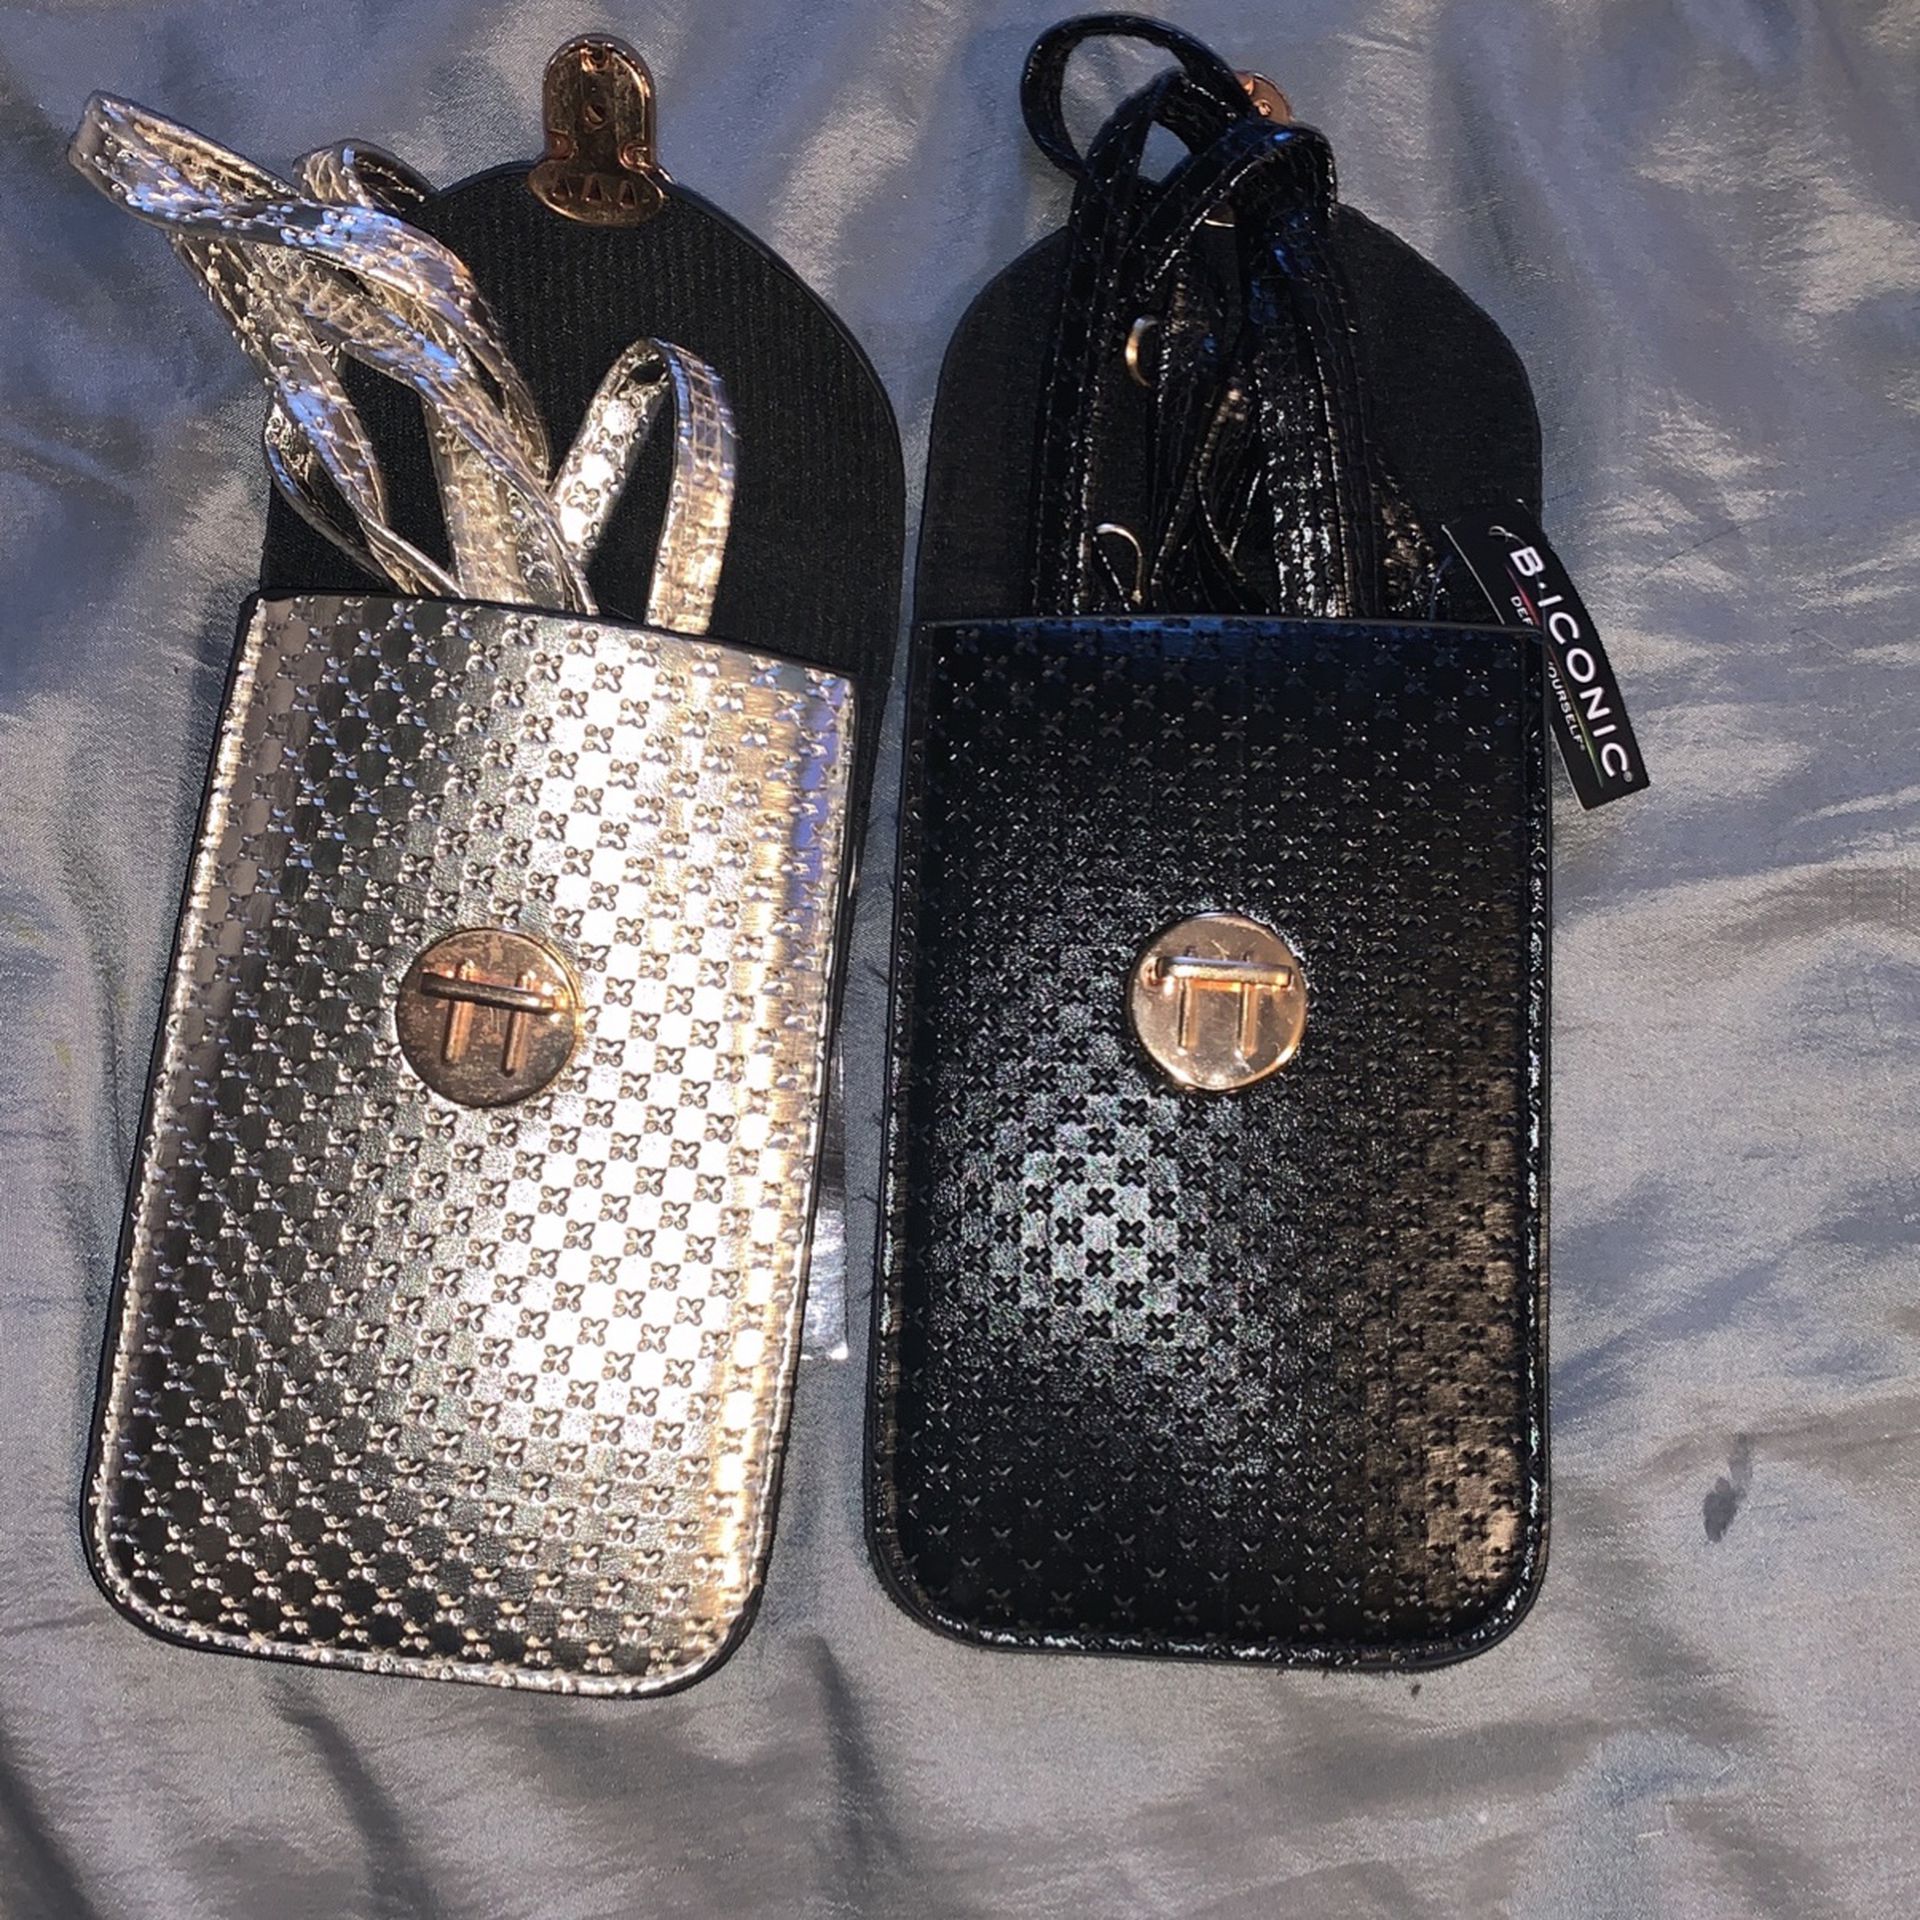 2 Accessory Bags